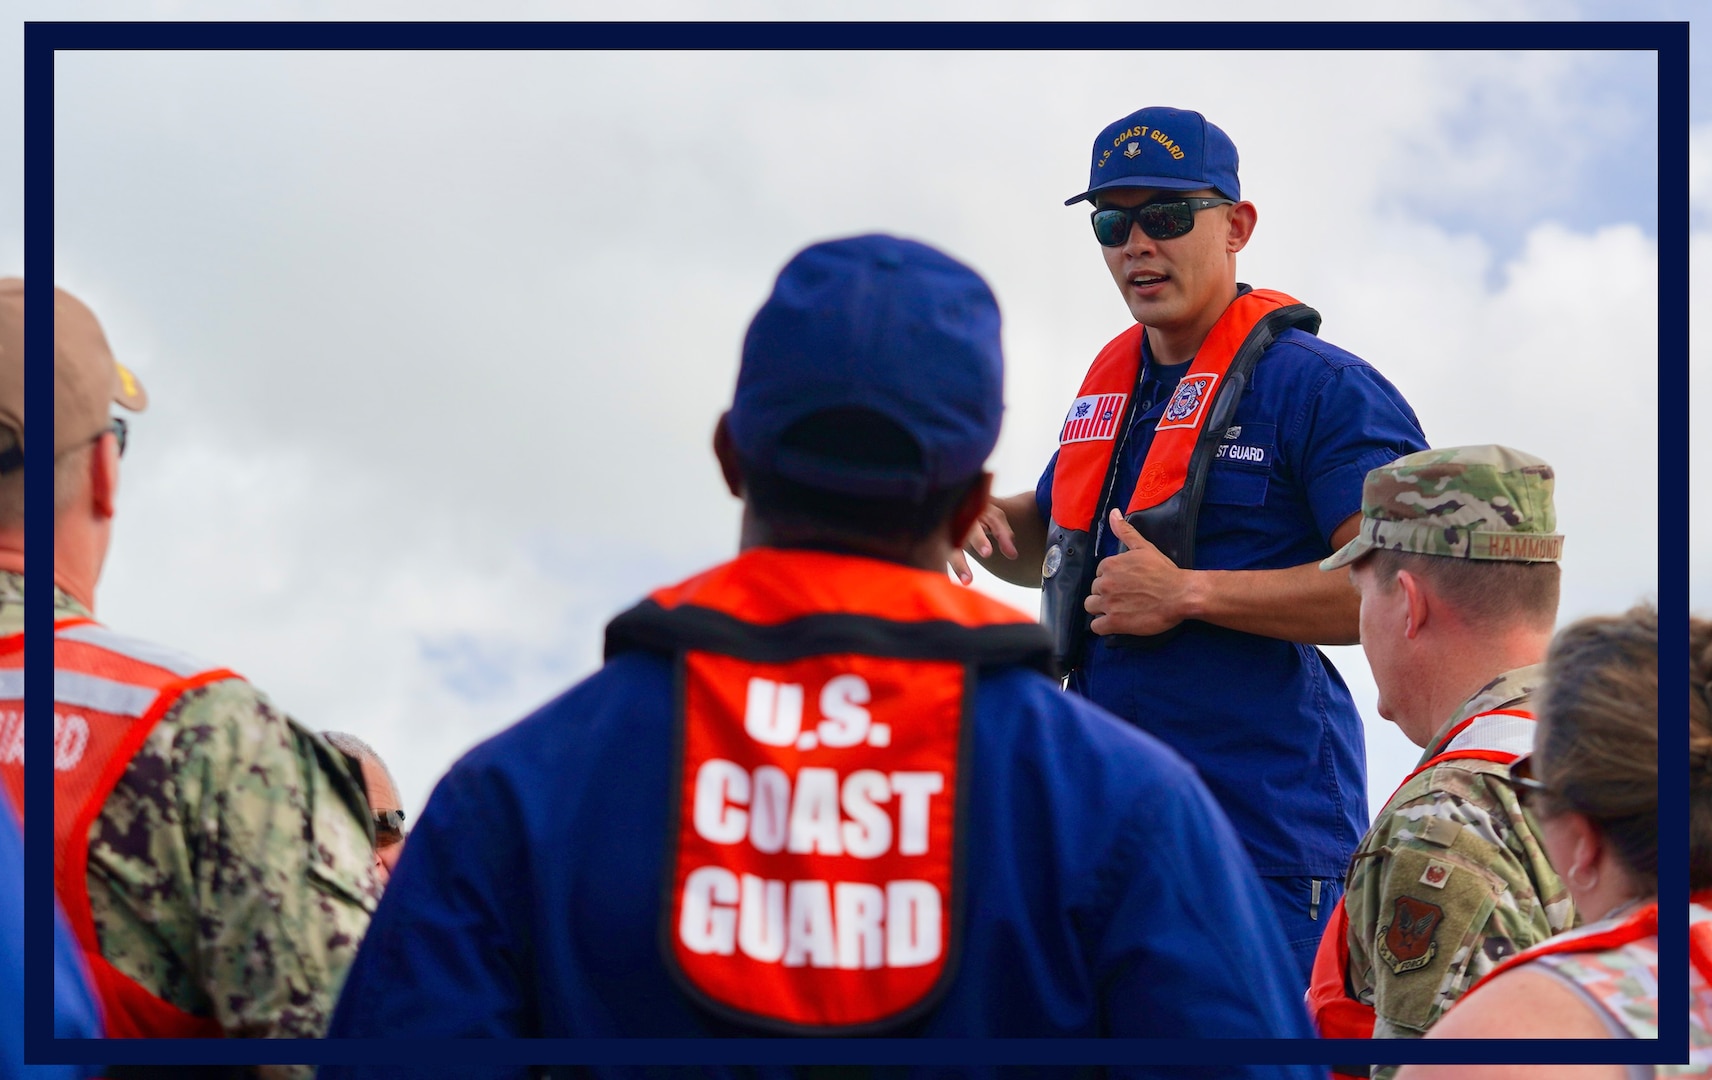 Petty Officer 2nd Class Will Naden, a boatswains mate at Station Apra Harbor, gives a safety brief to Department of Defense personnel in Sumay Cove, Guam, ahead of a boat trip to view the Outer Apra Harbor breakwater on Dec. 4, 2023. The breakwater was damaged by Typhoon Mawar and an effort is underway to effect repairs. (U.S. Coast Guard photo by Chief Warrant Officer Sara Muir)